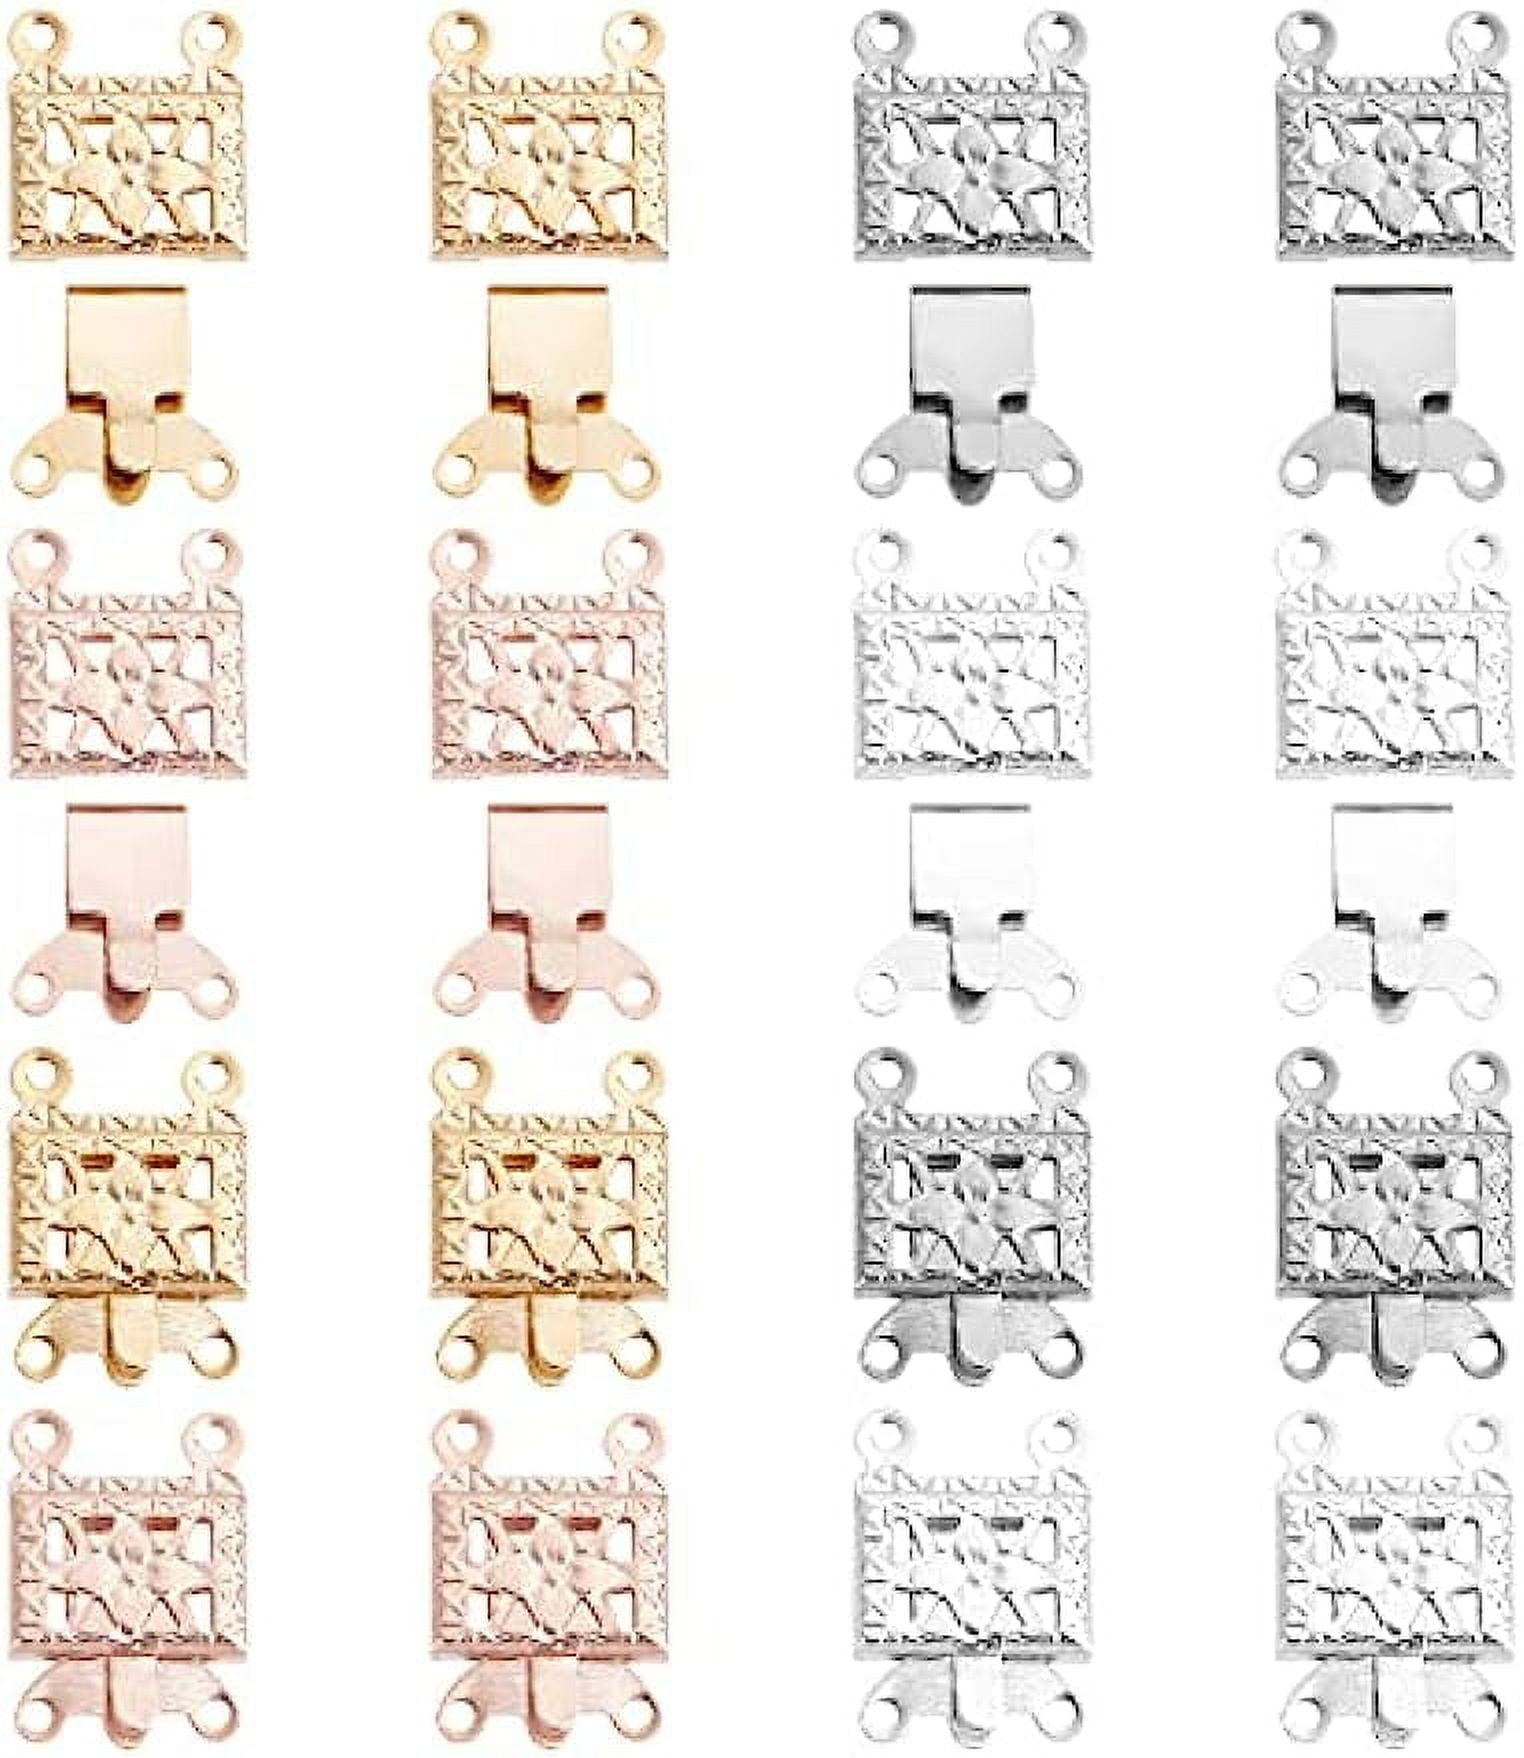 Dailyacc Layered Necklace Clasps,4 Pieces 2 Size Slide Clasp Lock Necklace  Connector for Multi Strands Slide Tube Clasps